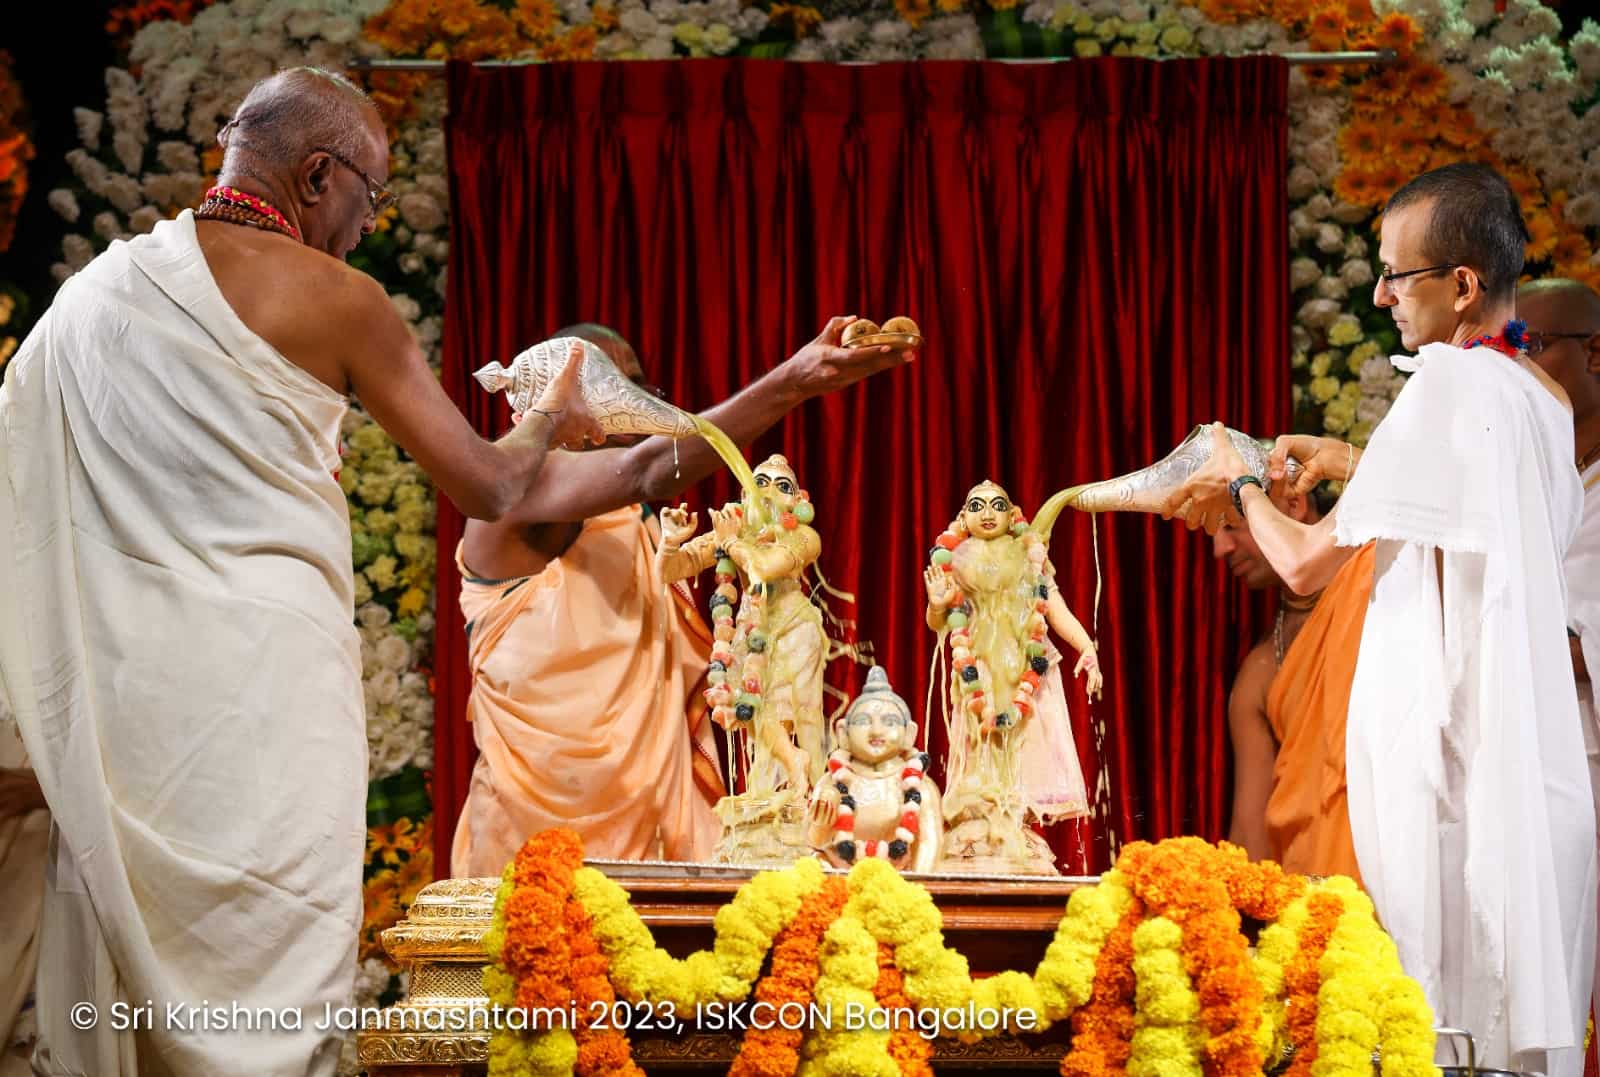 India celebrates Janmashtami with pomp and gaiety, Home Minister Shah visits ISKCON temple